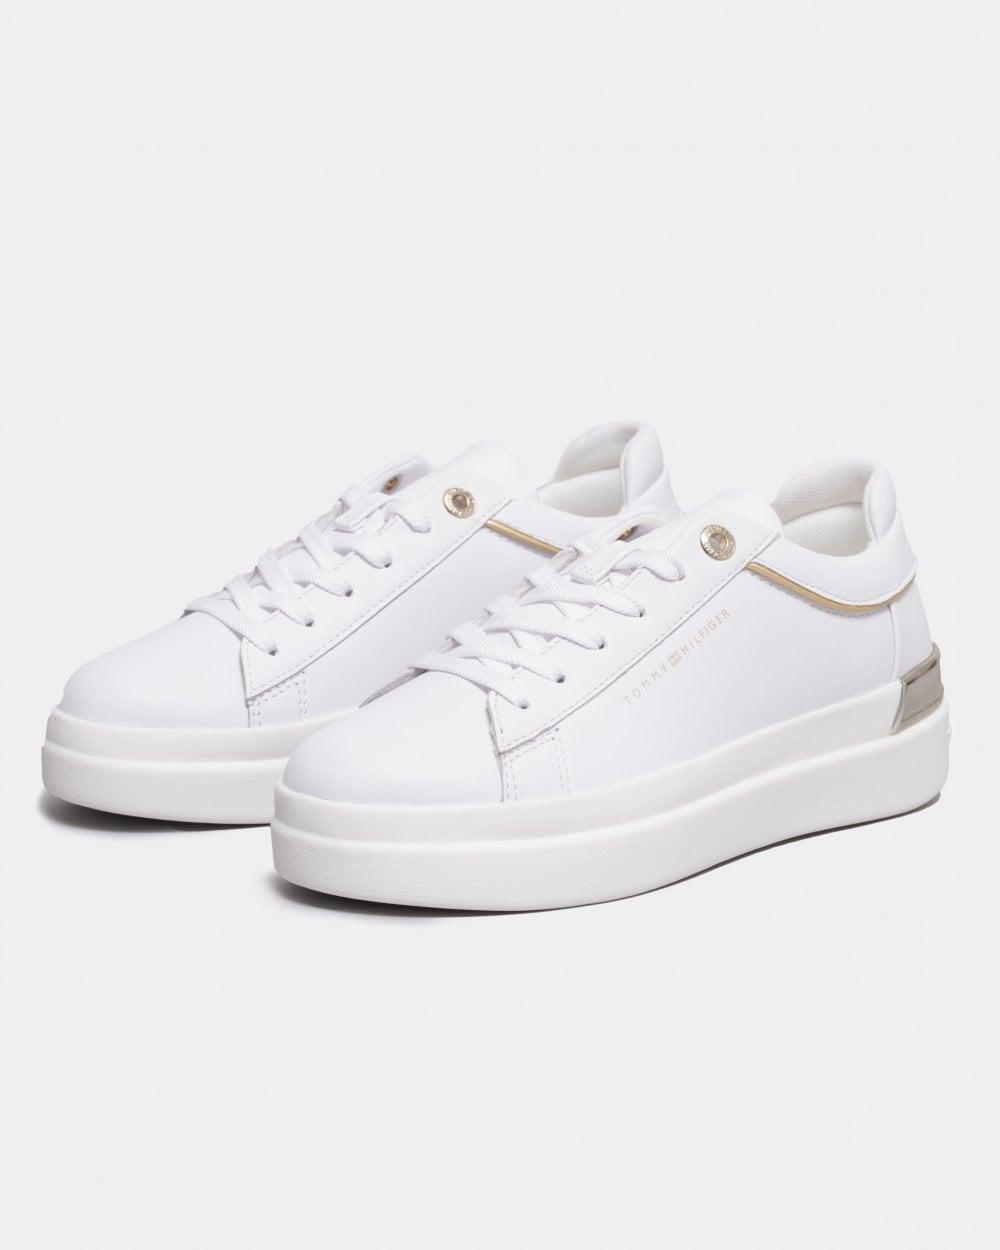 Tommy Hilfiger Lux Metallic Cupsole Trainers in White | Lyst